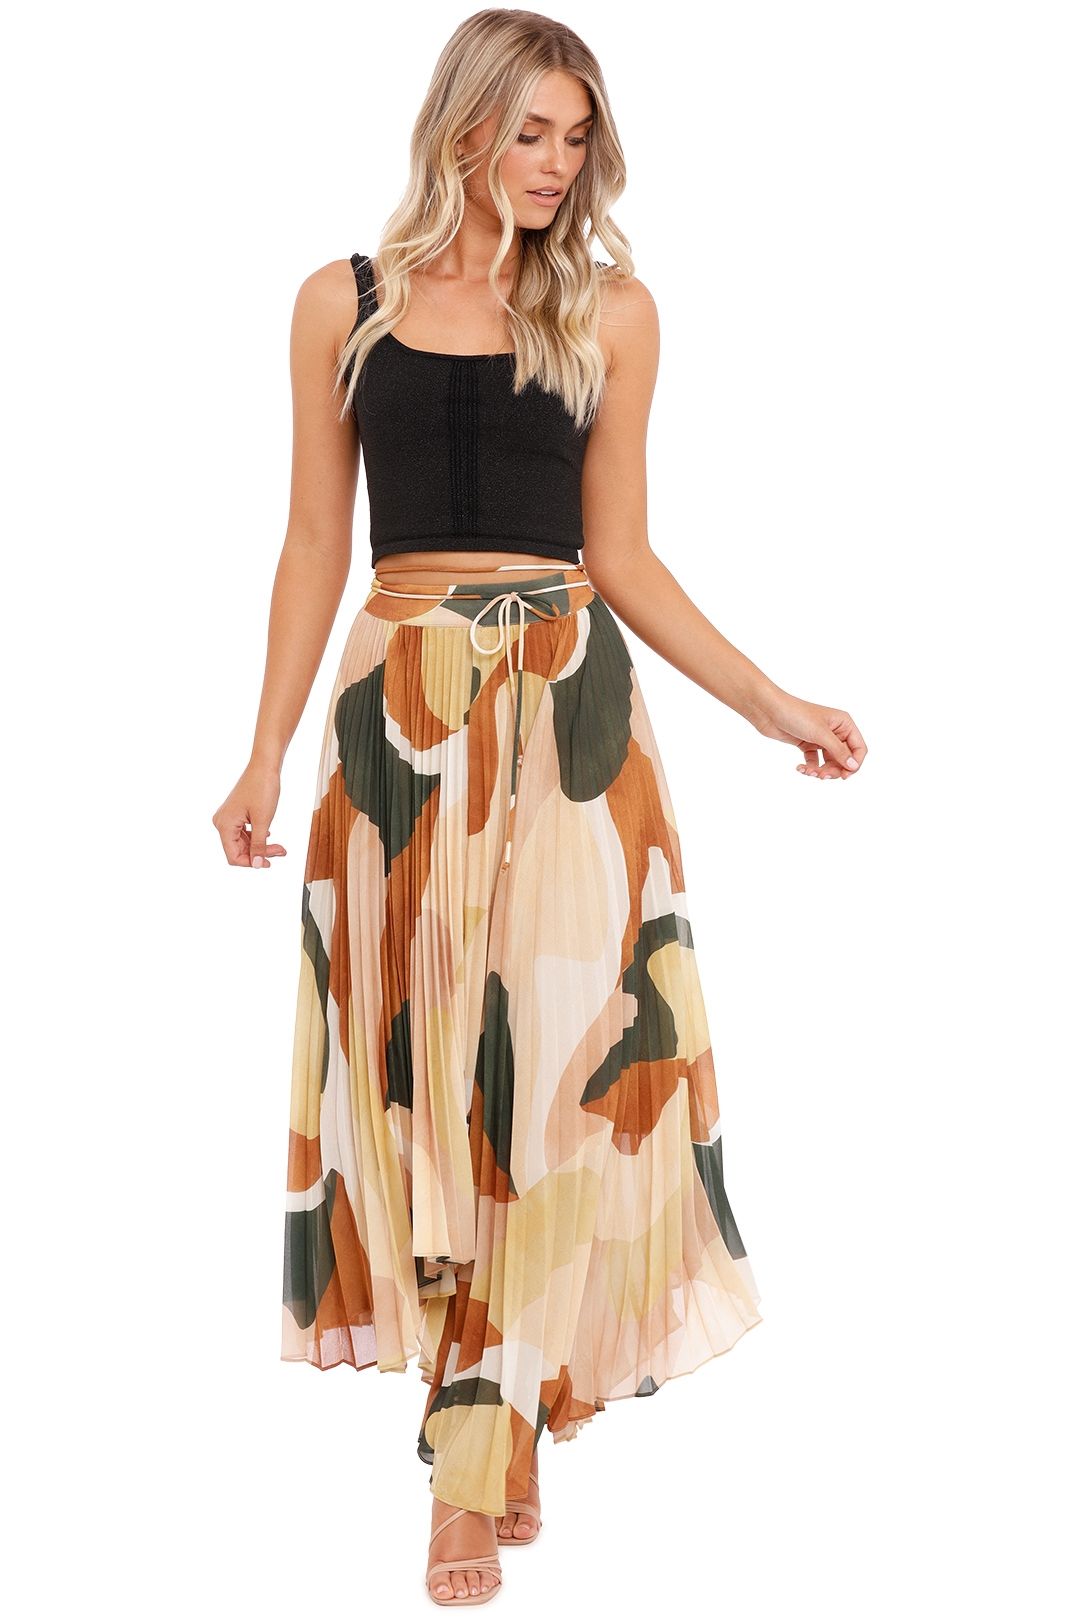 Ministry of Style Retro Resort Pleated Skirt abstract